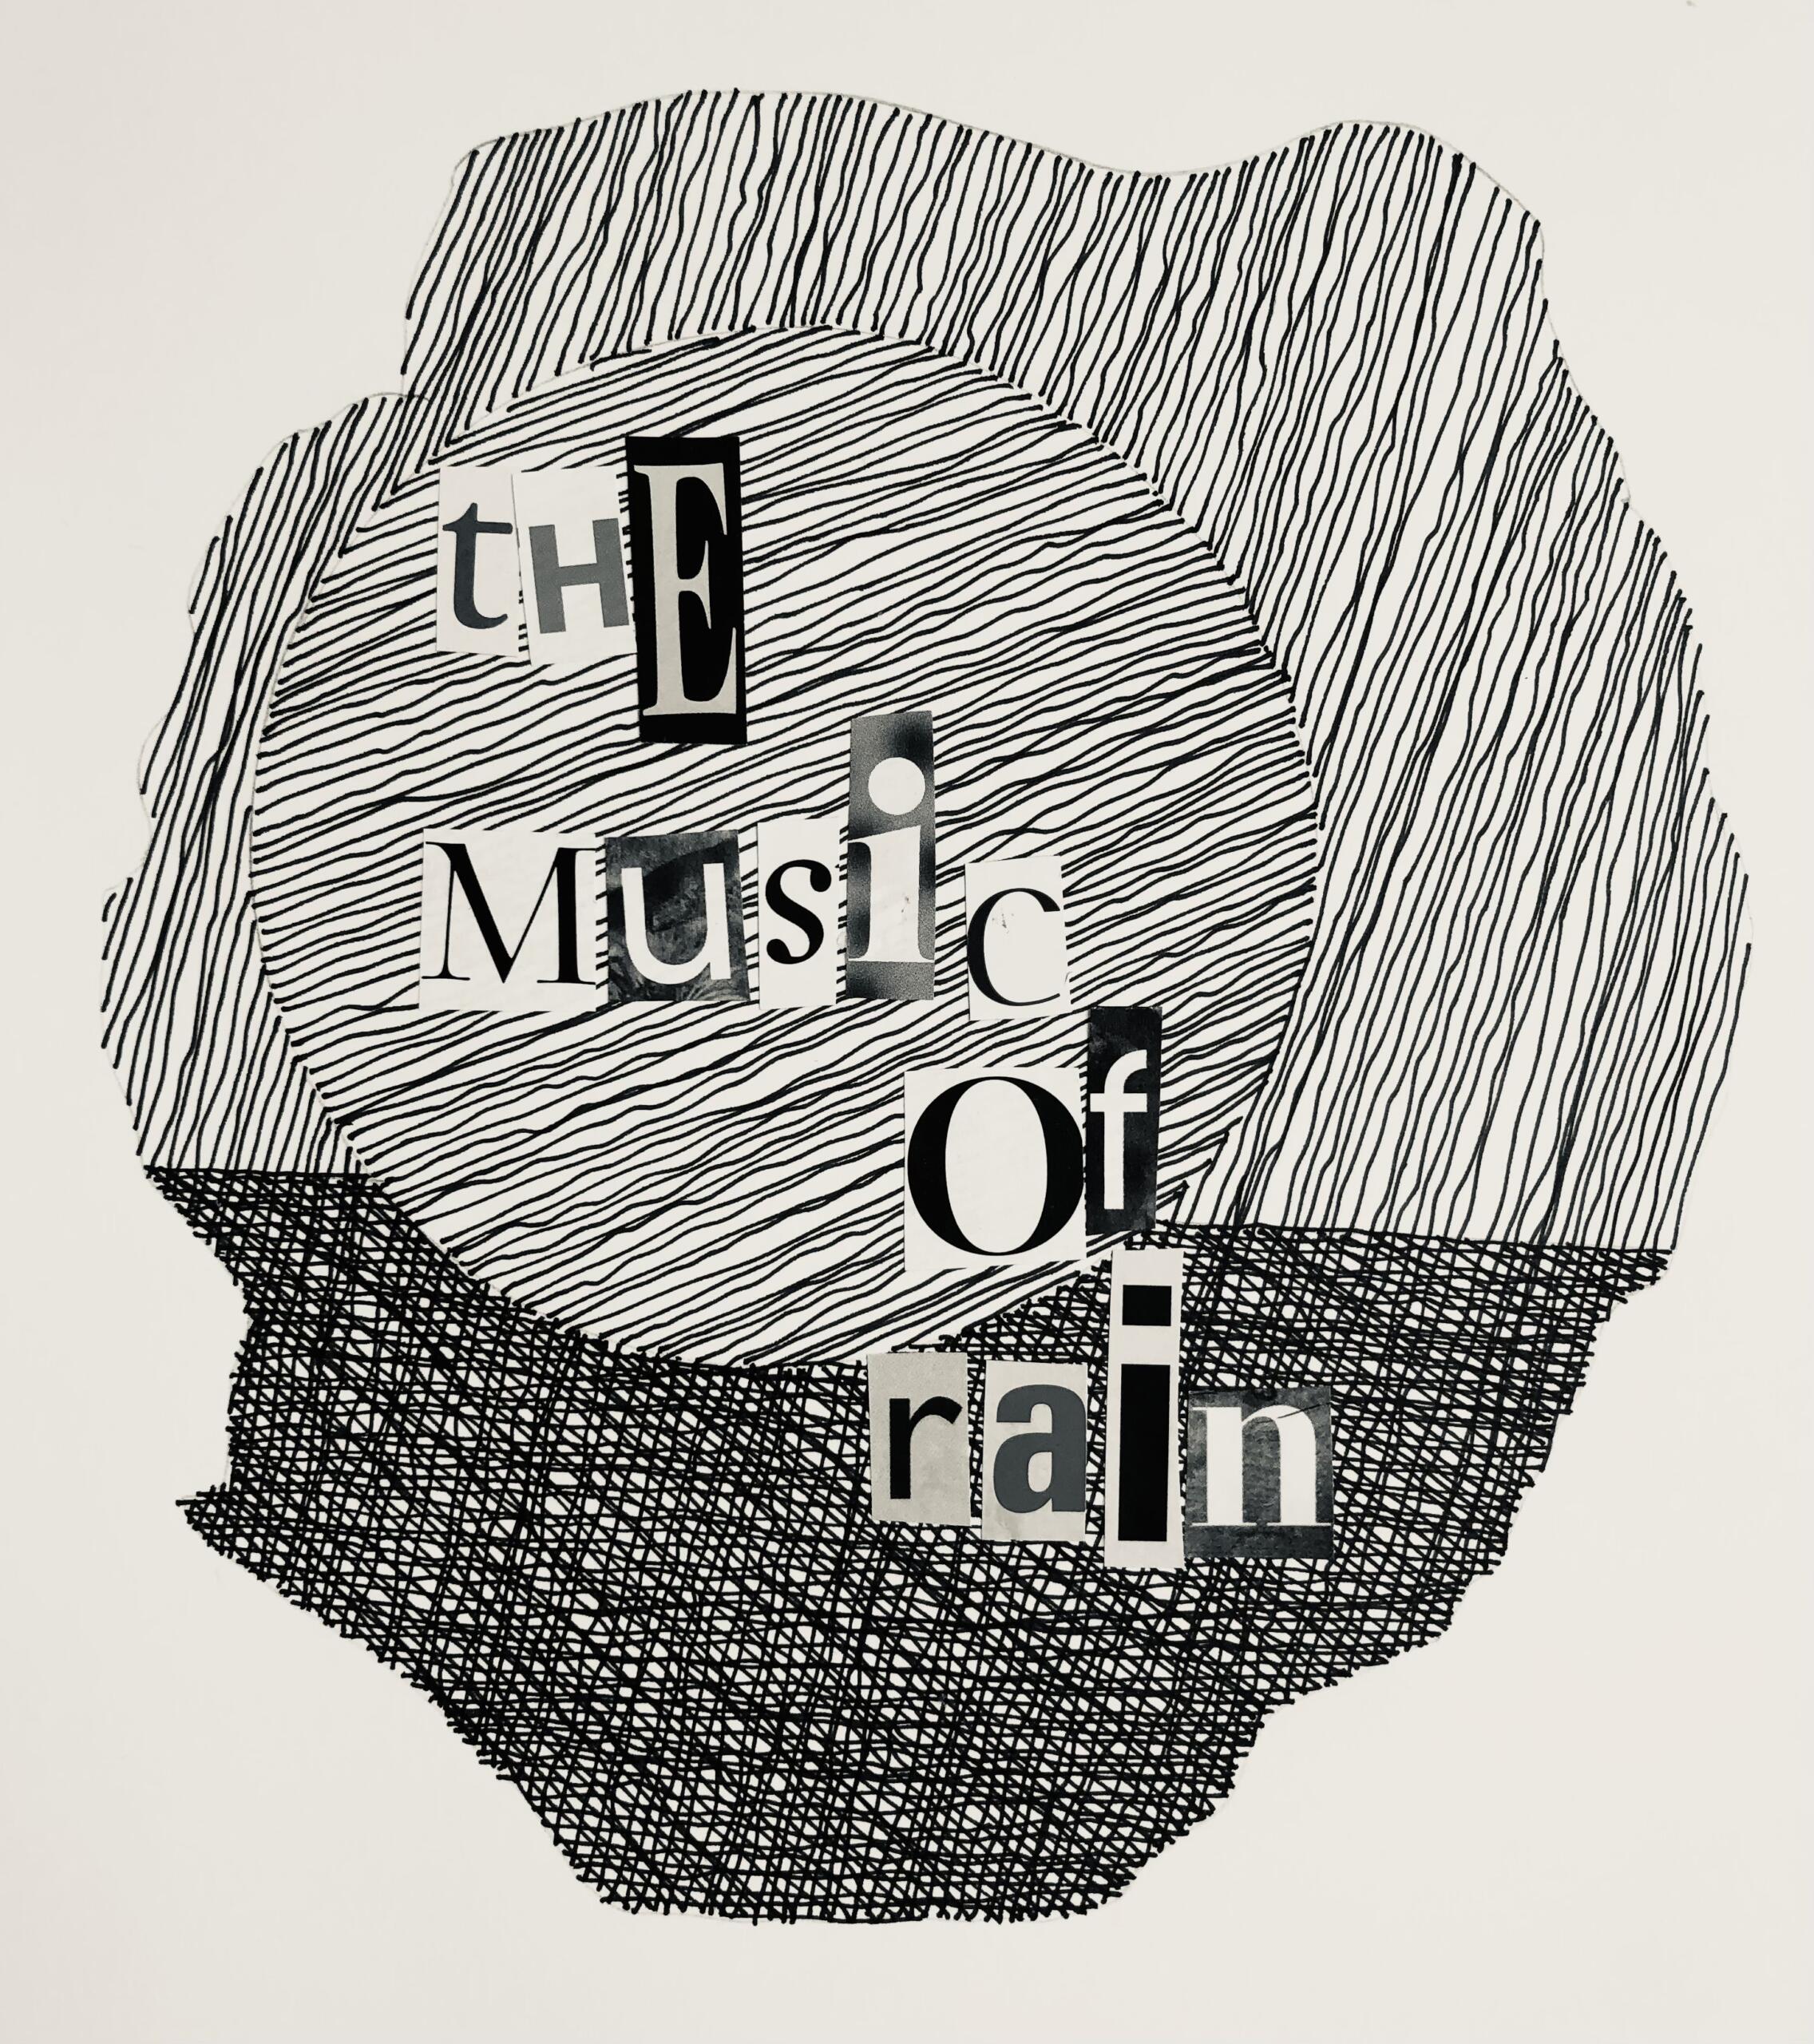 An abstract drawing of circles and lines, with letters cut in various styles collaged over that reads "the music of the rain"